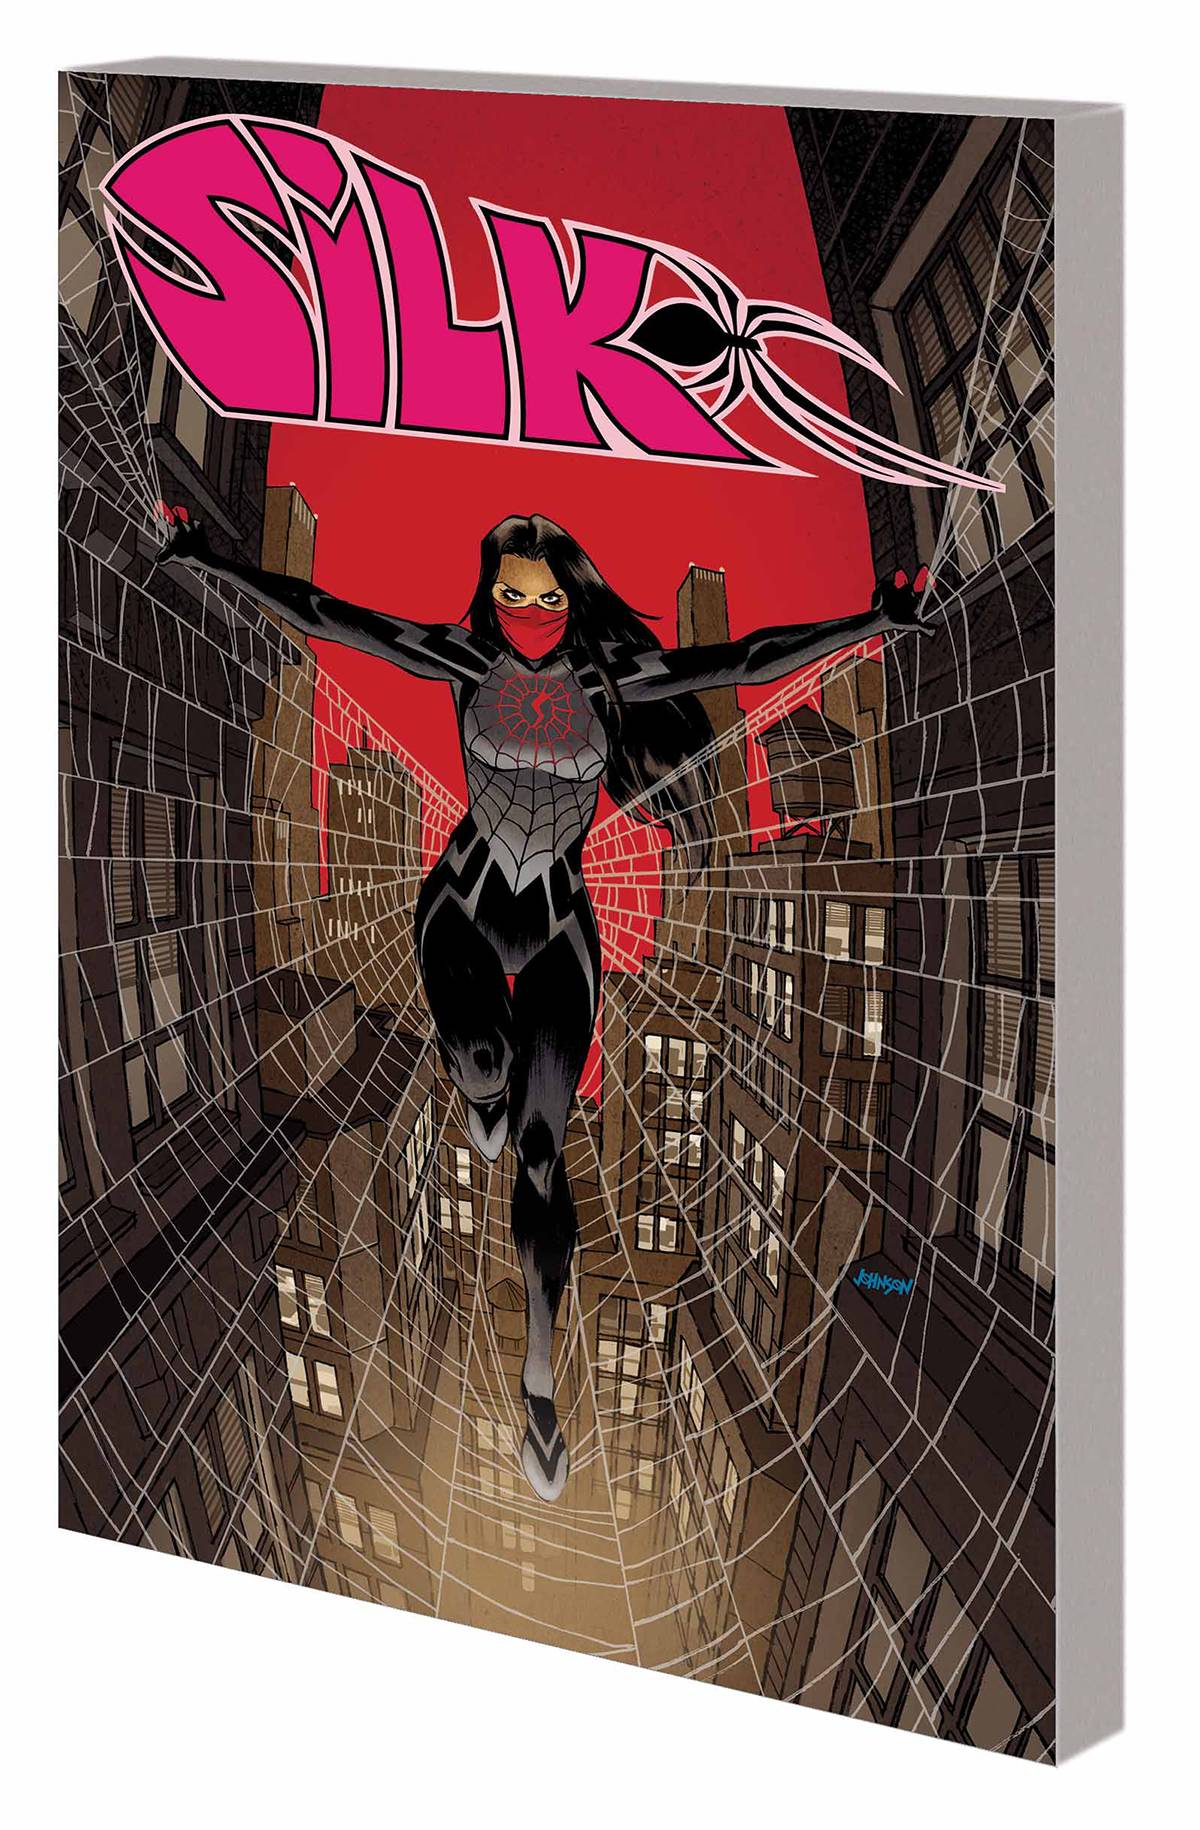 SILK TP VOL 00 LIFE AND TIMES OF CINDY MOON